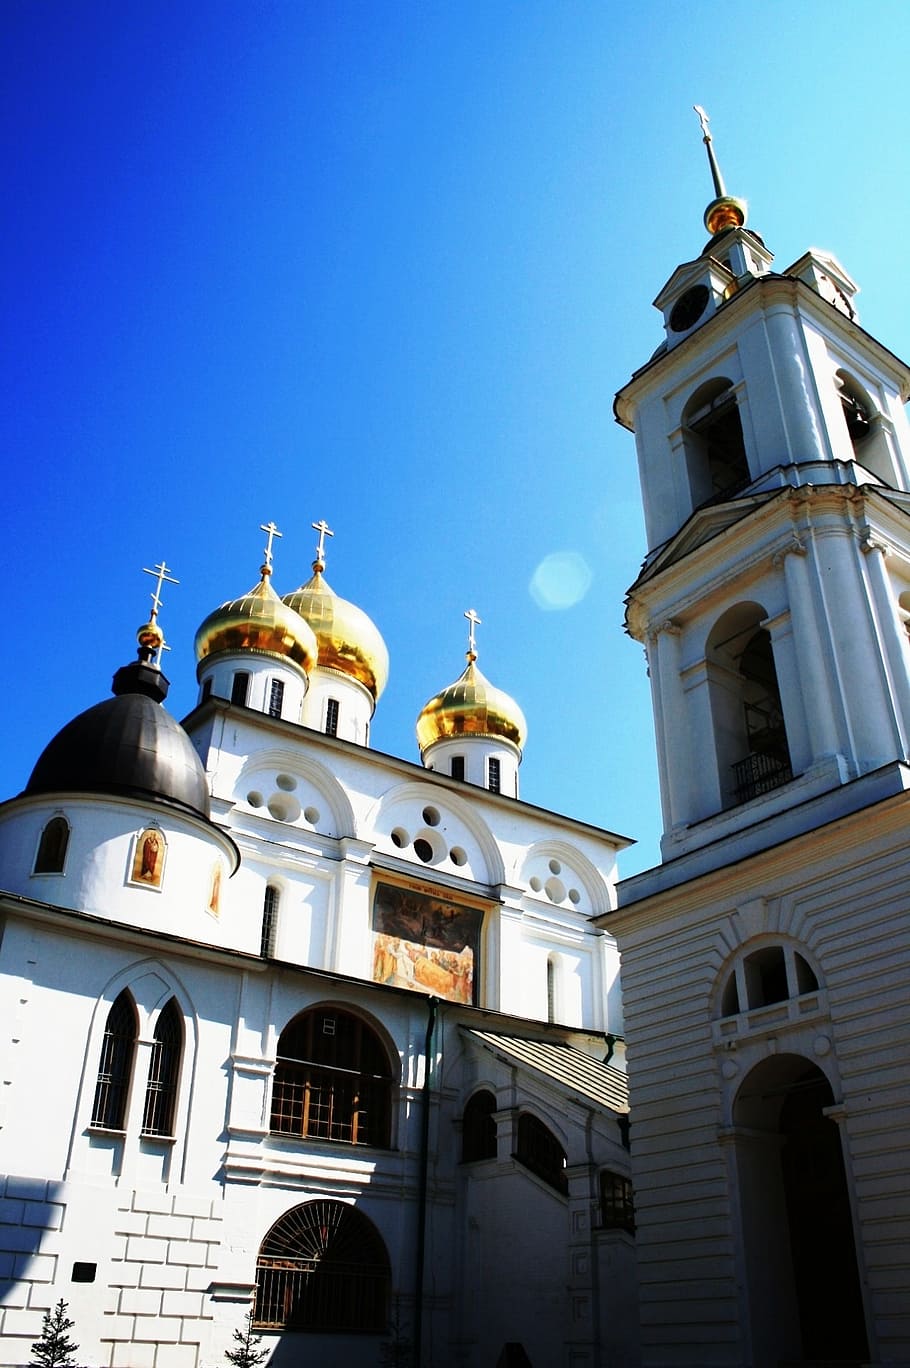 cathedral, church, white, building, golden domes, onion black domes, religion, russian orthodox, towers, arches